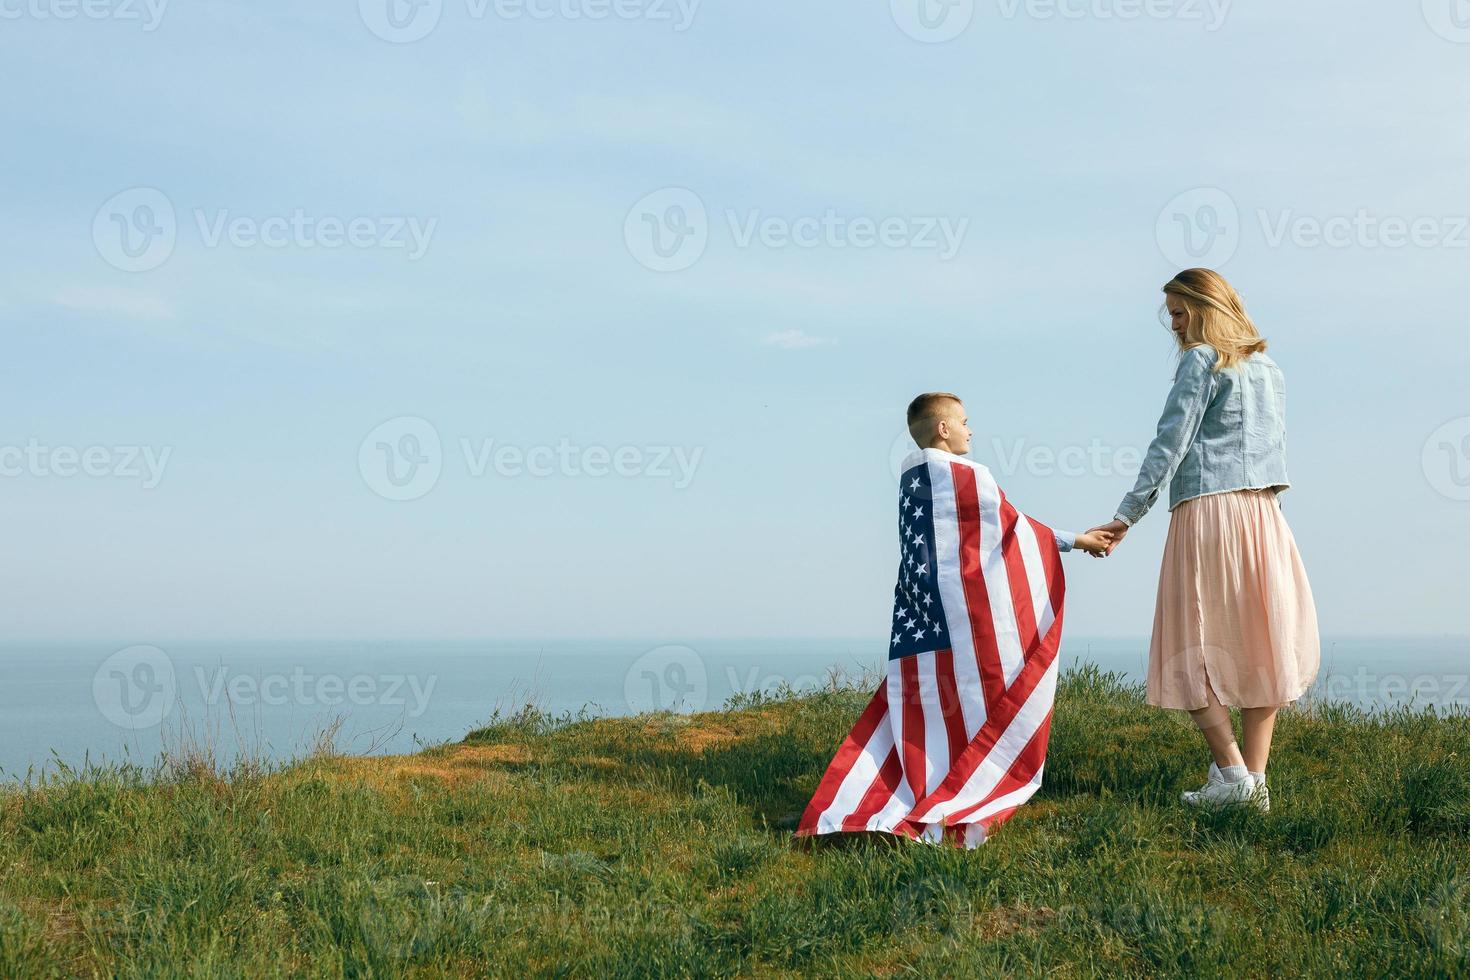 Single mother with son on independence day of USA photo